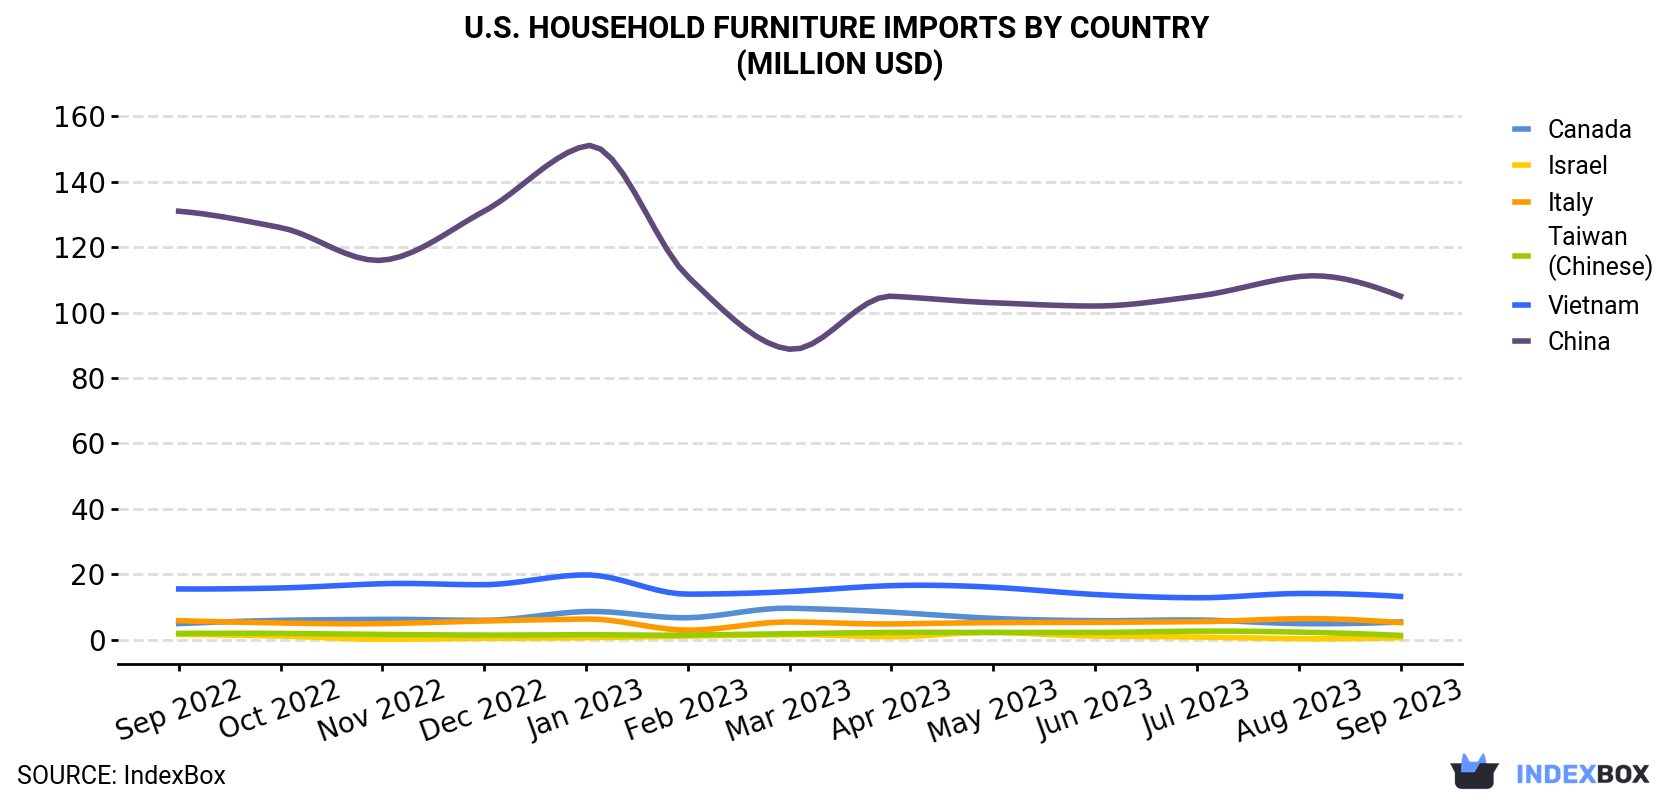 U.S. Household Furniture Imports By Country (Million USD)